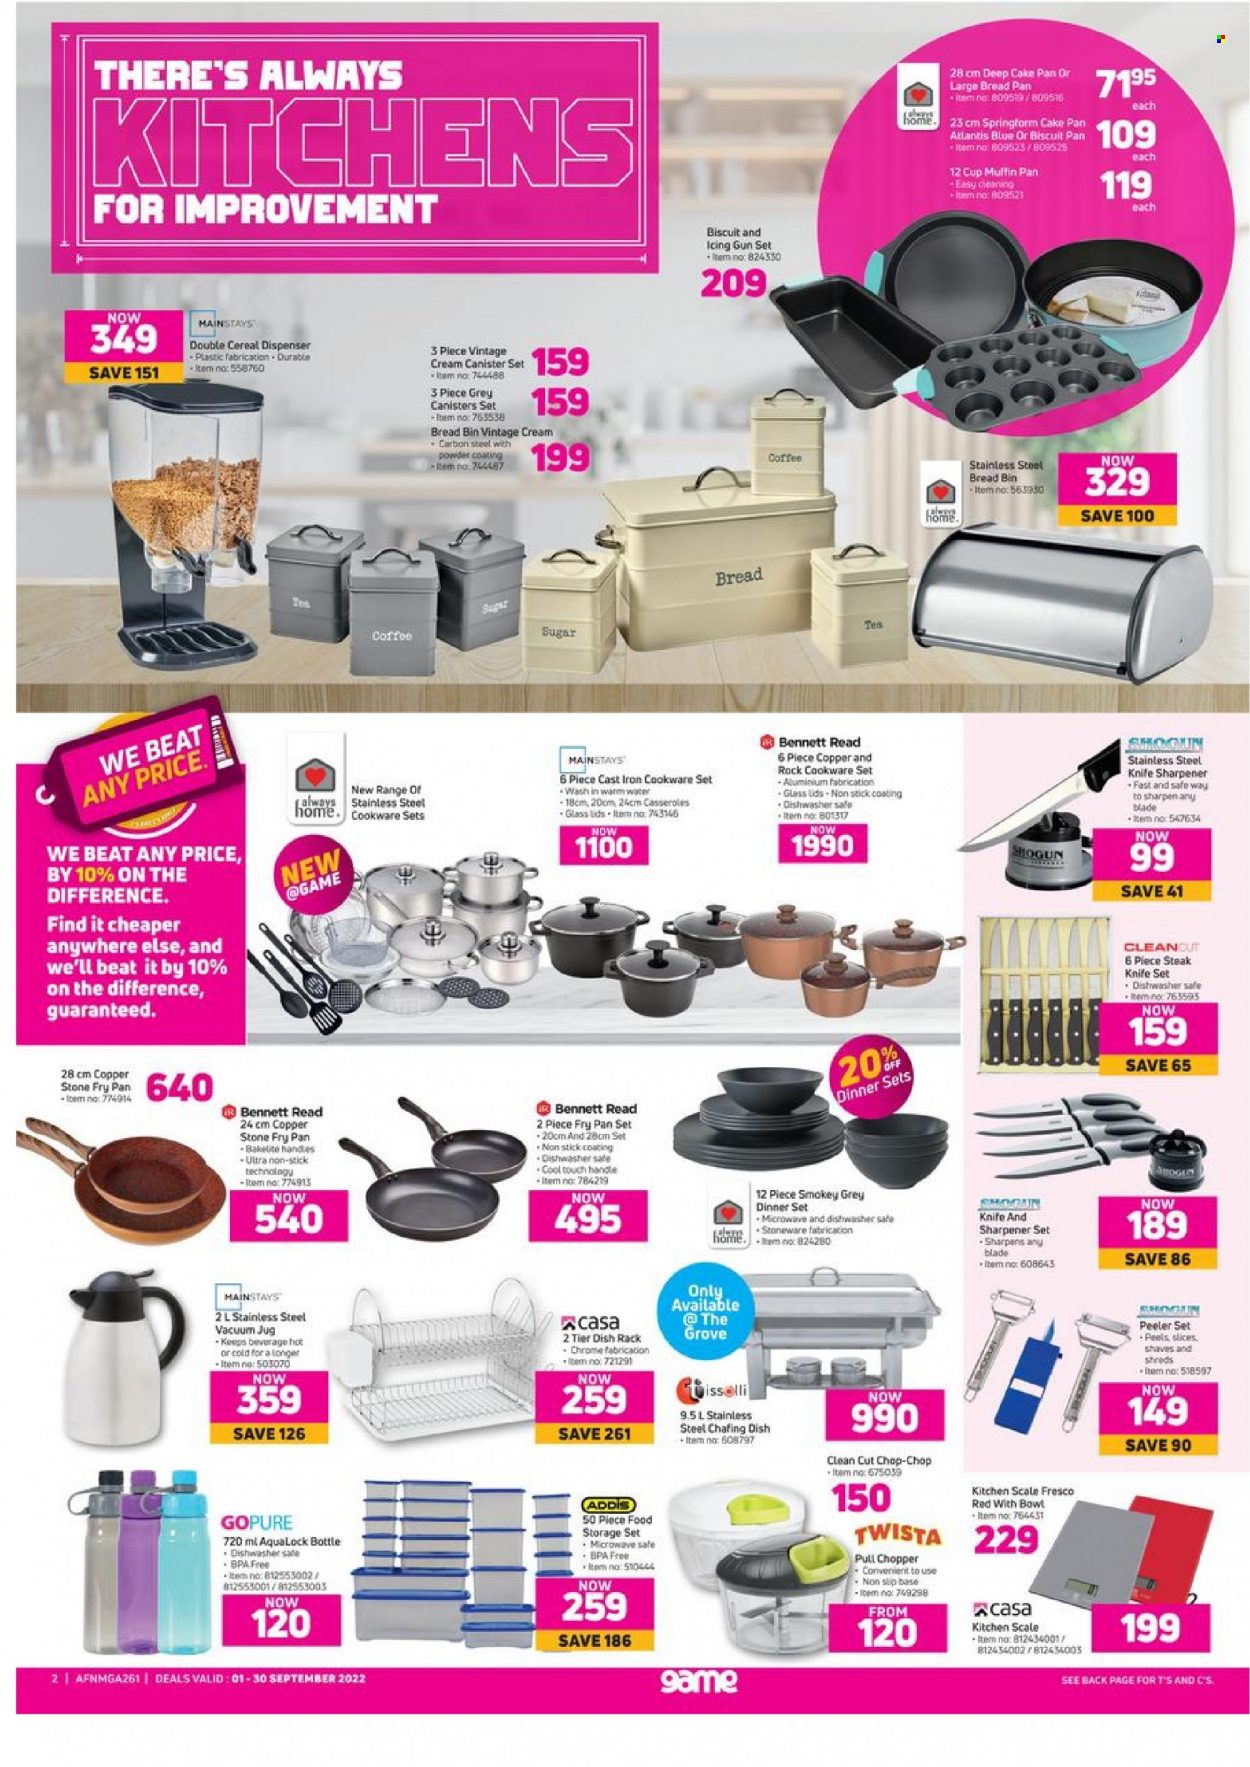 thumbnail - Game catalogue  - 01/09/2022 - 30/09/2022 - Sales products - bread, biscuit, sugar, coffee, cookware set, dinnerware set, knife, sharpener, pan, canister, bread pan, dish rack, chafing dish, cake pan, steak knife, cup, handy chopper, scale, dinner plate, peeler, knife sharpener, dispenser, kitchen scale, stoneware, storage container set, Bennett Read. Page 2.